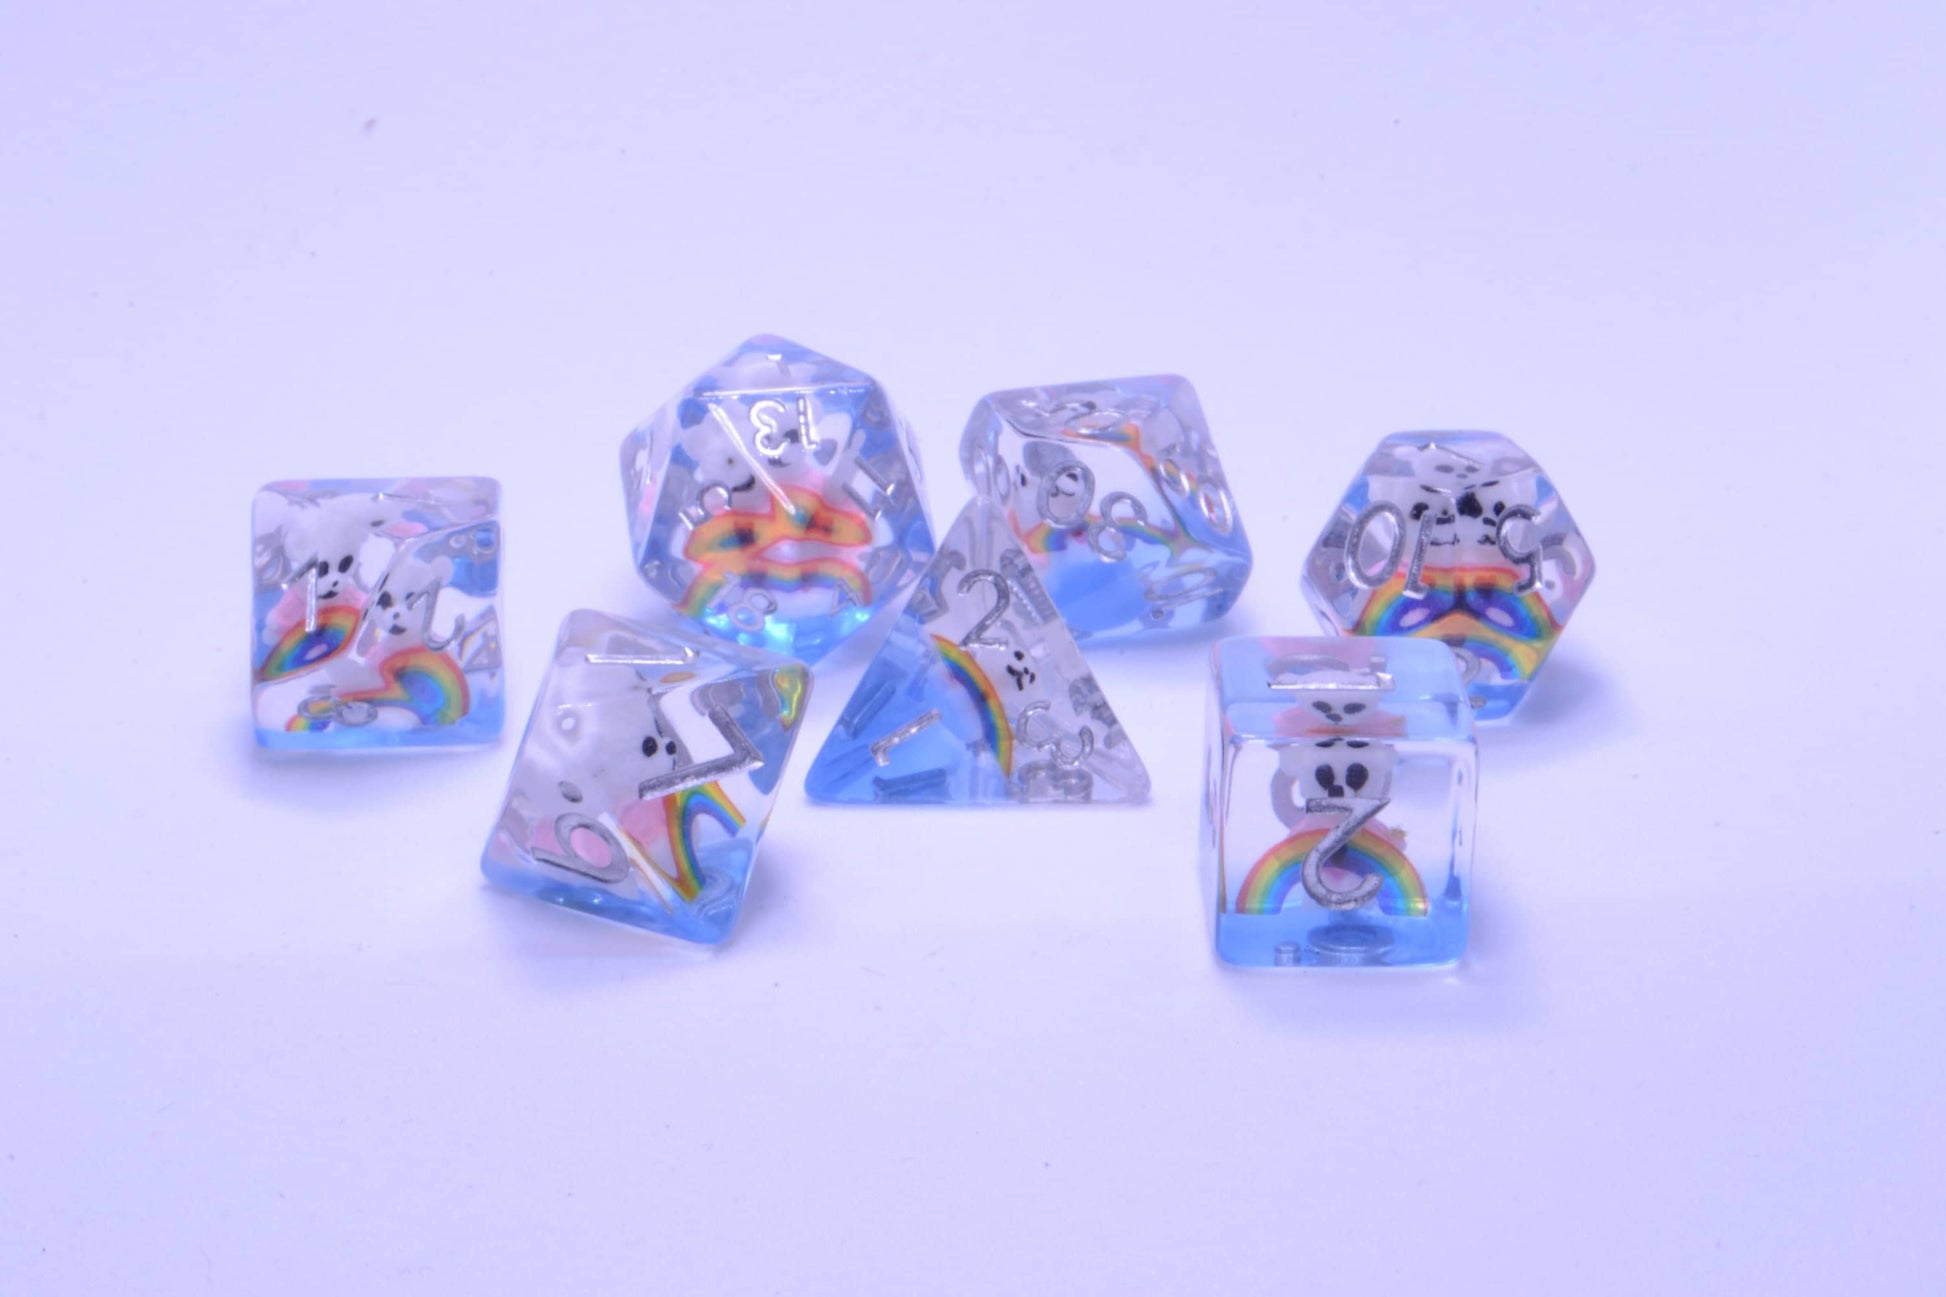 Rainbow Love - A Cute Teddy Bear Encased Soft Edge Resin D&D Dice Set With Silver Numbering - For Dungeons and Dragons - Gift Set